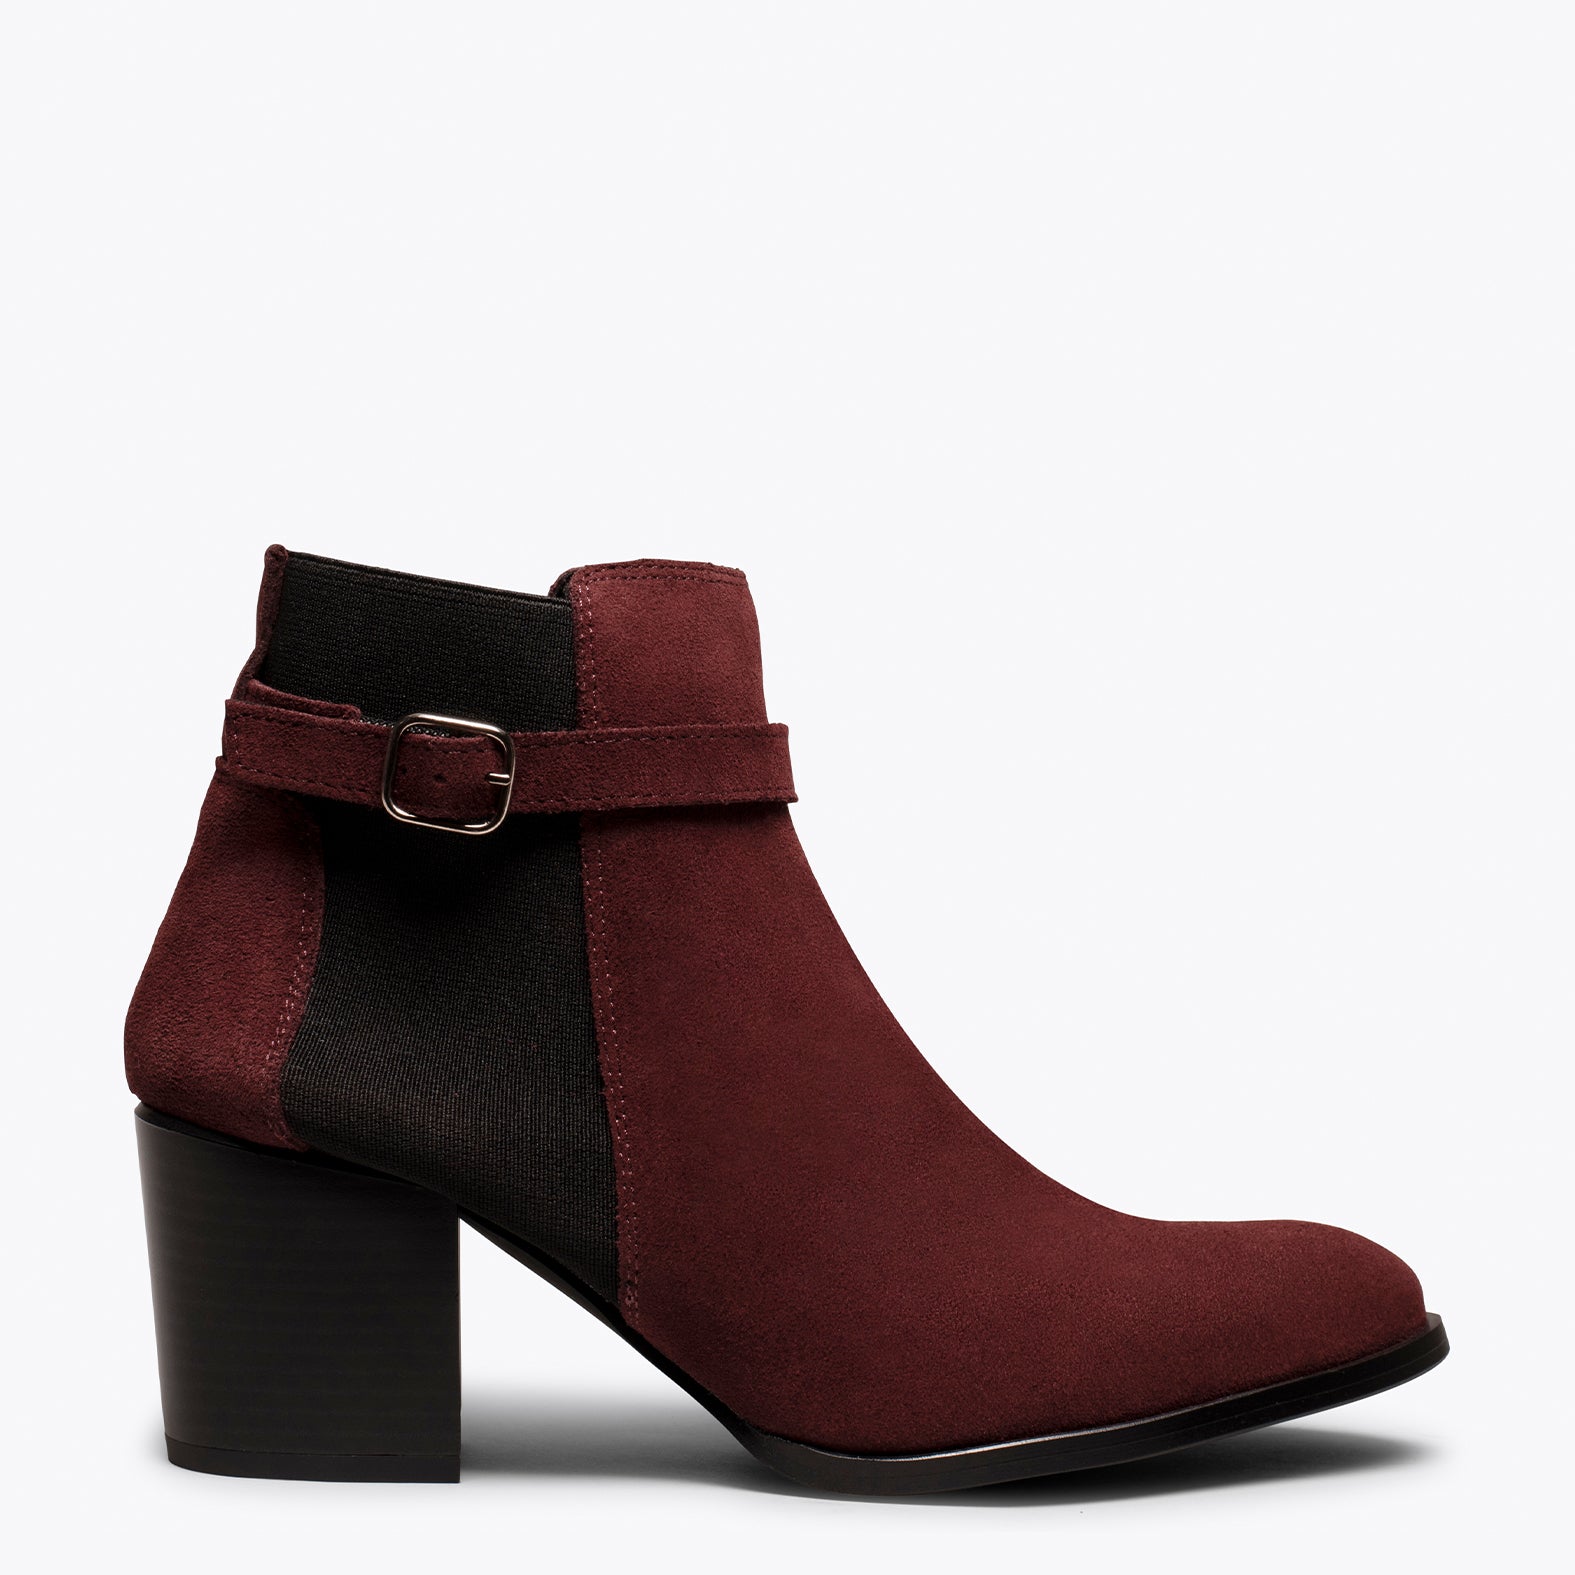 ELASTIC – BURGUNDY bootie with elastic side bands